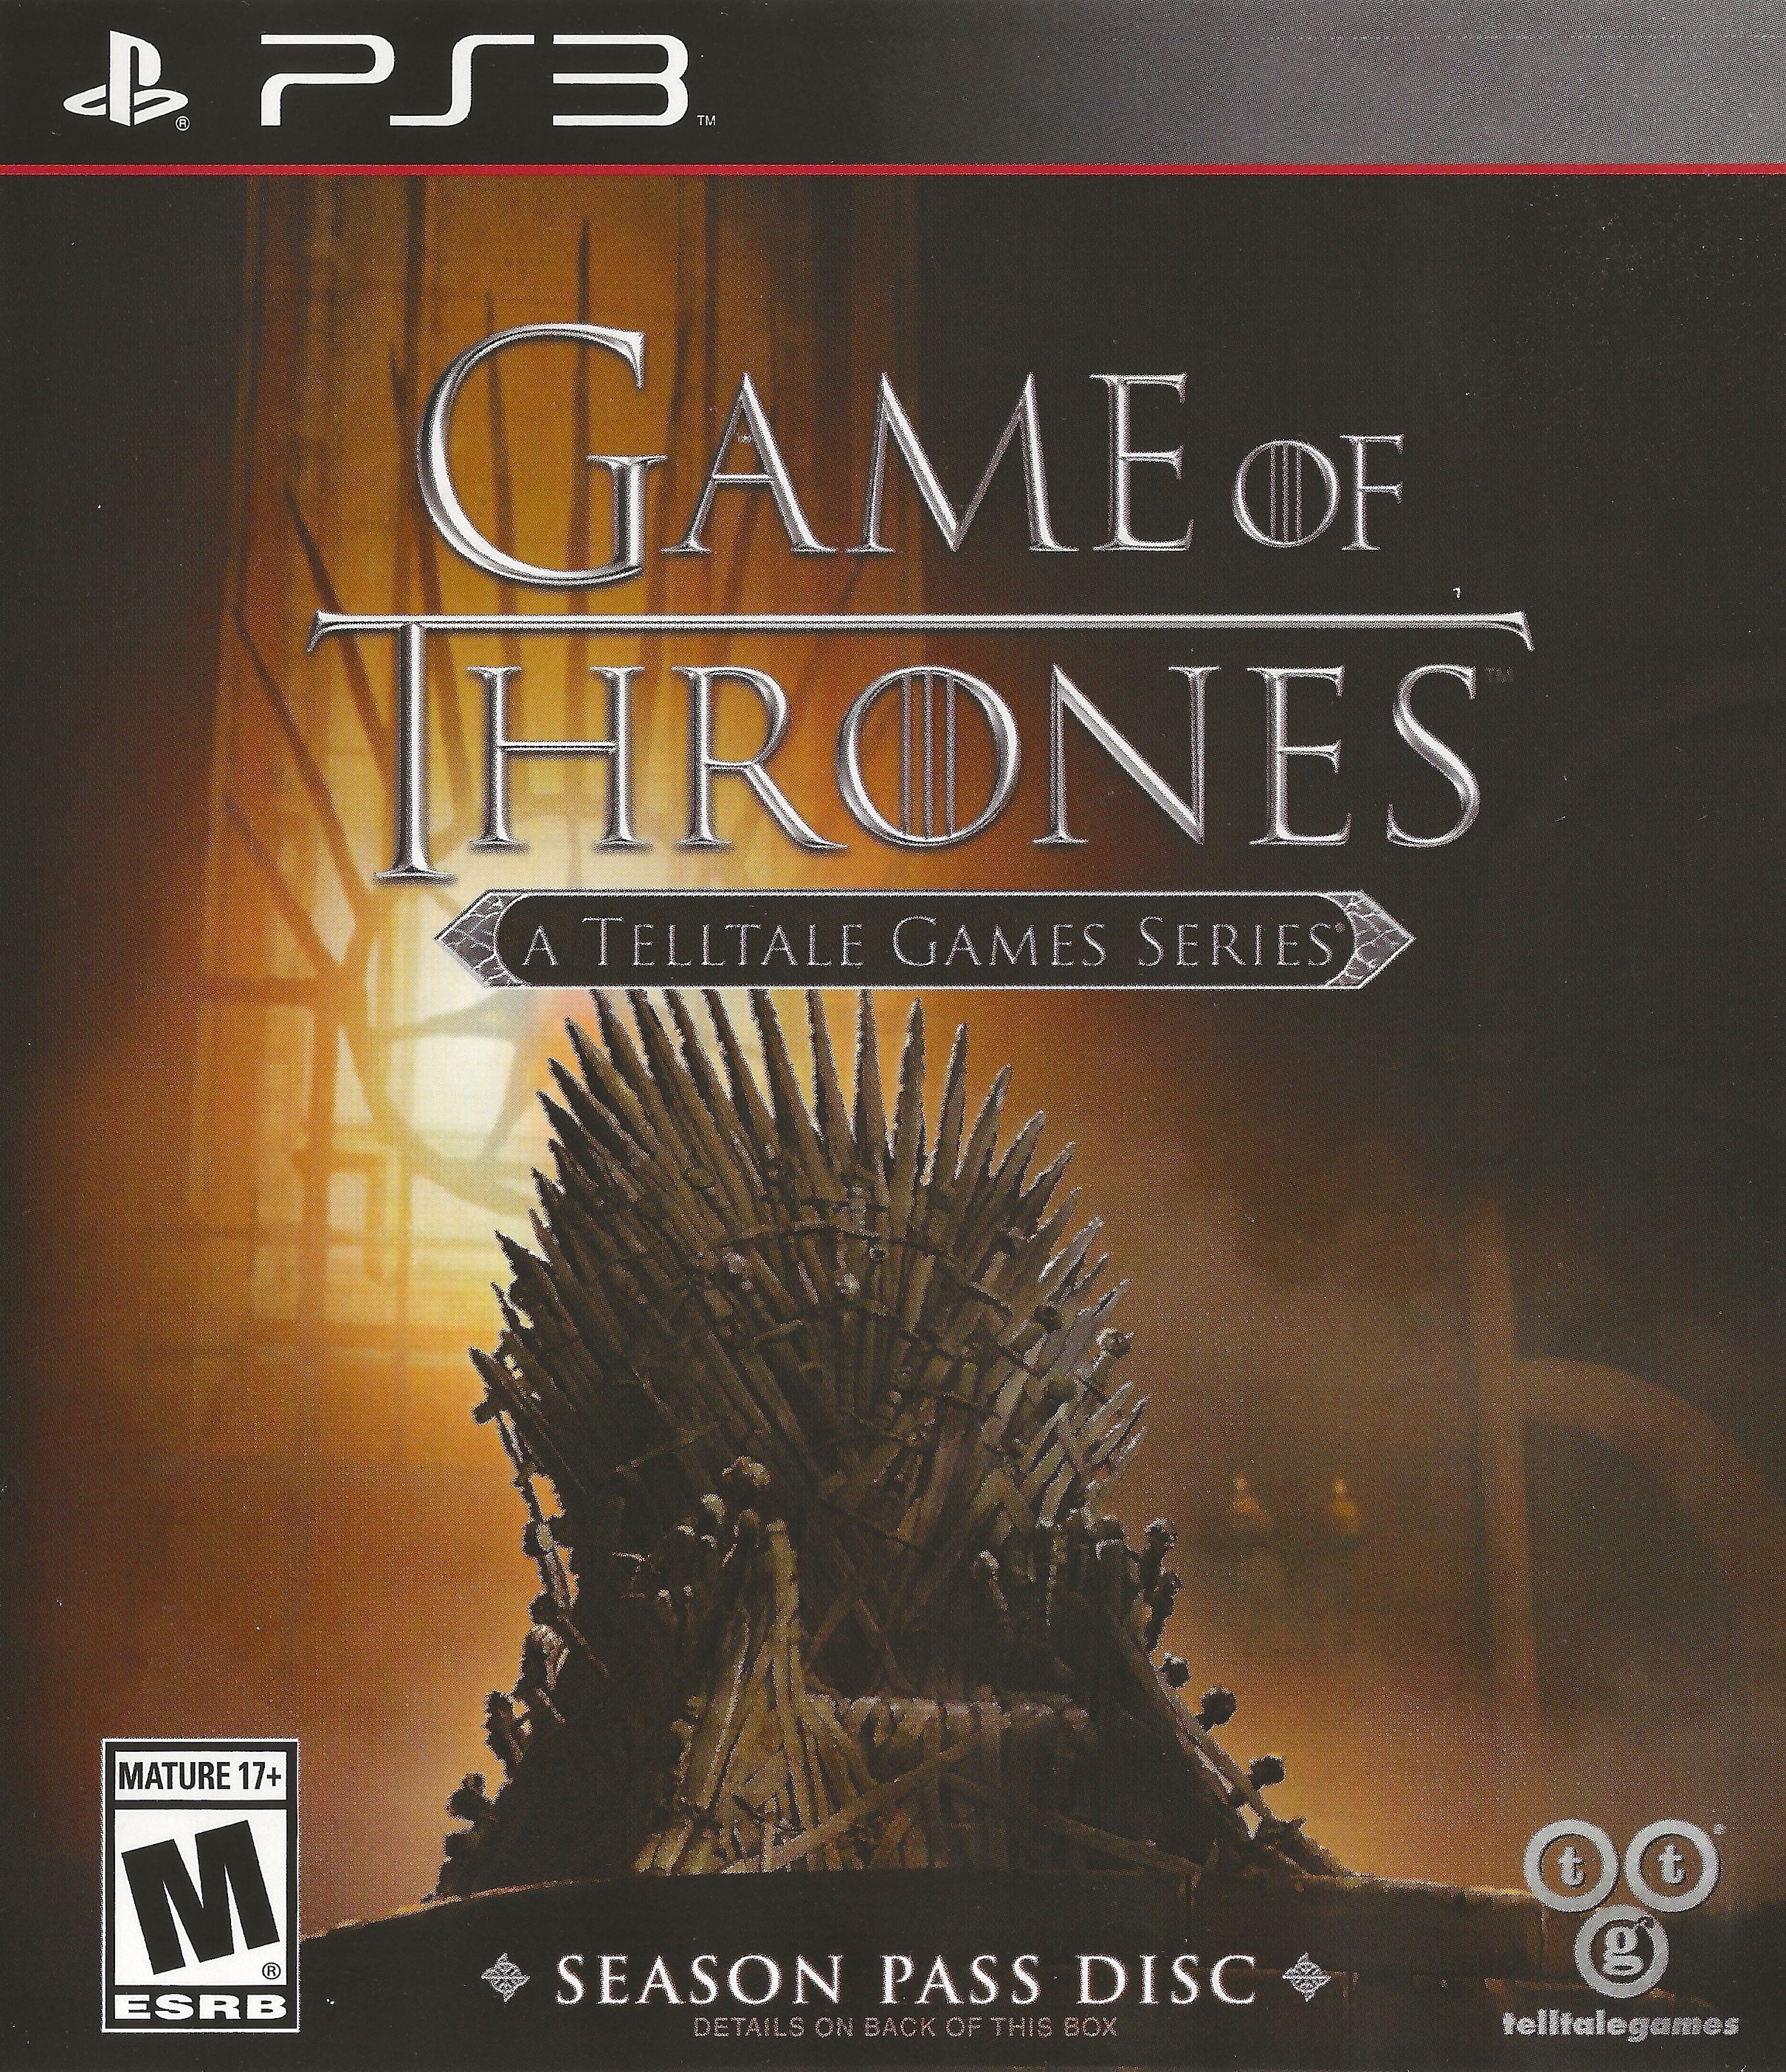 'Game of Thrones: a Telltale Games series'